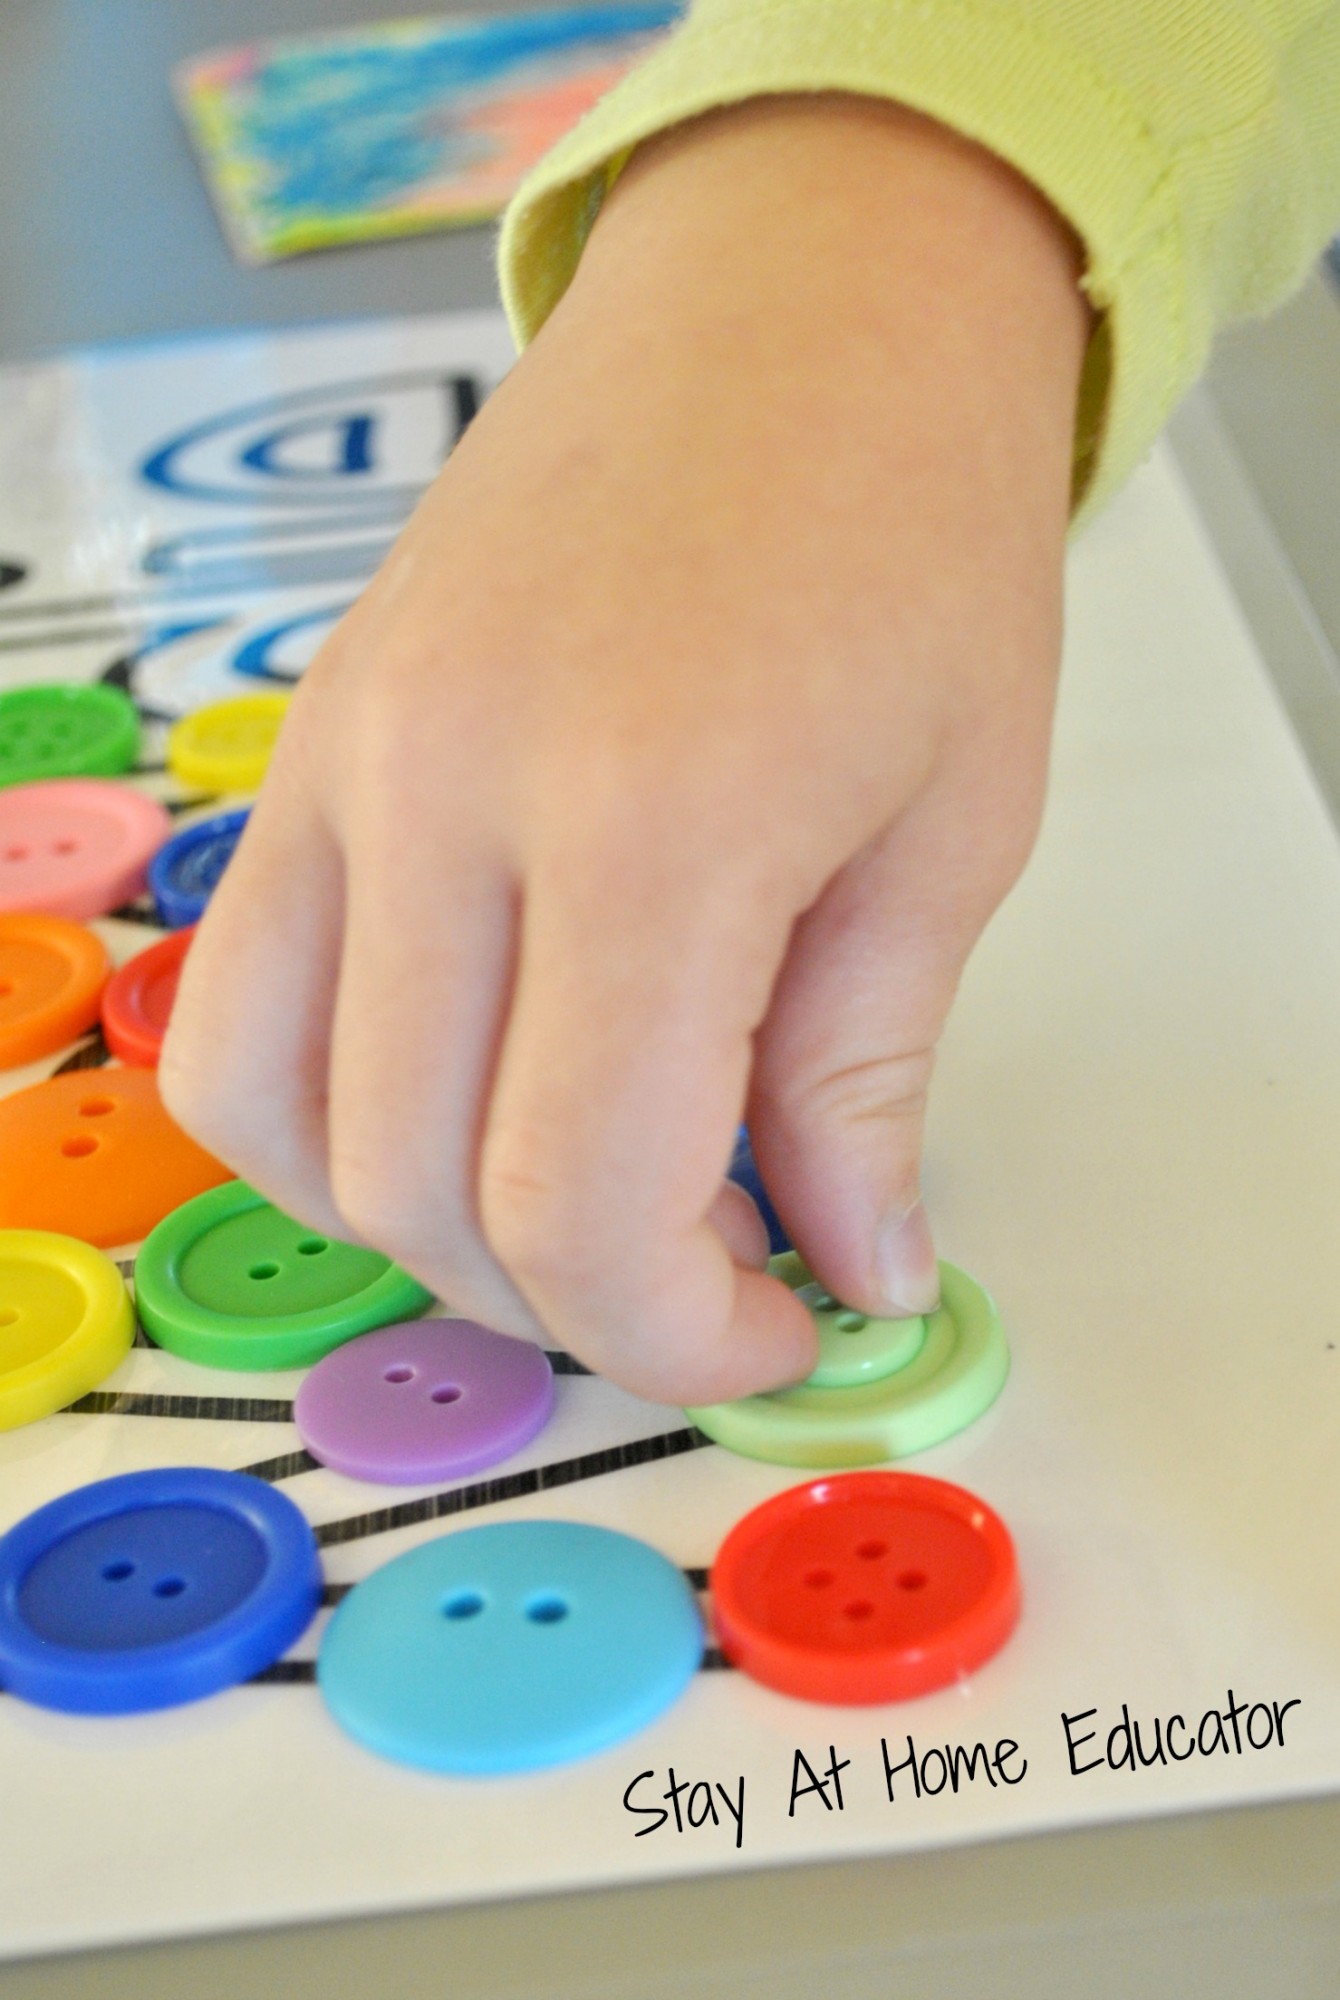 comparing button sizes during button names in preschool name recognition activity - Stay At Home Educator